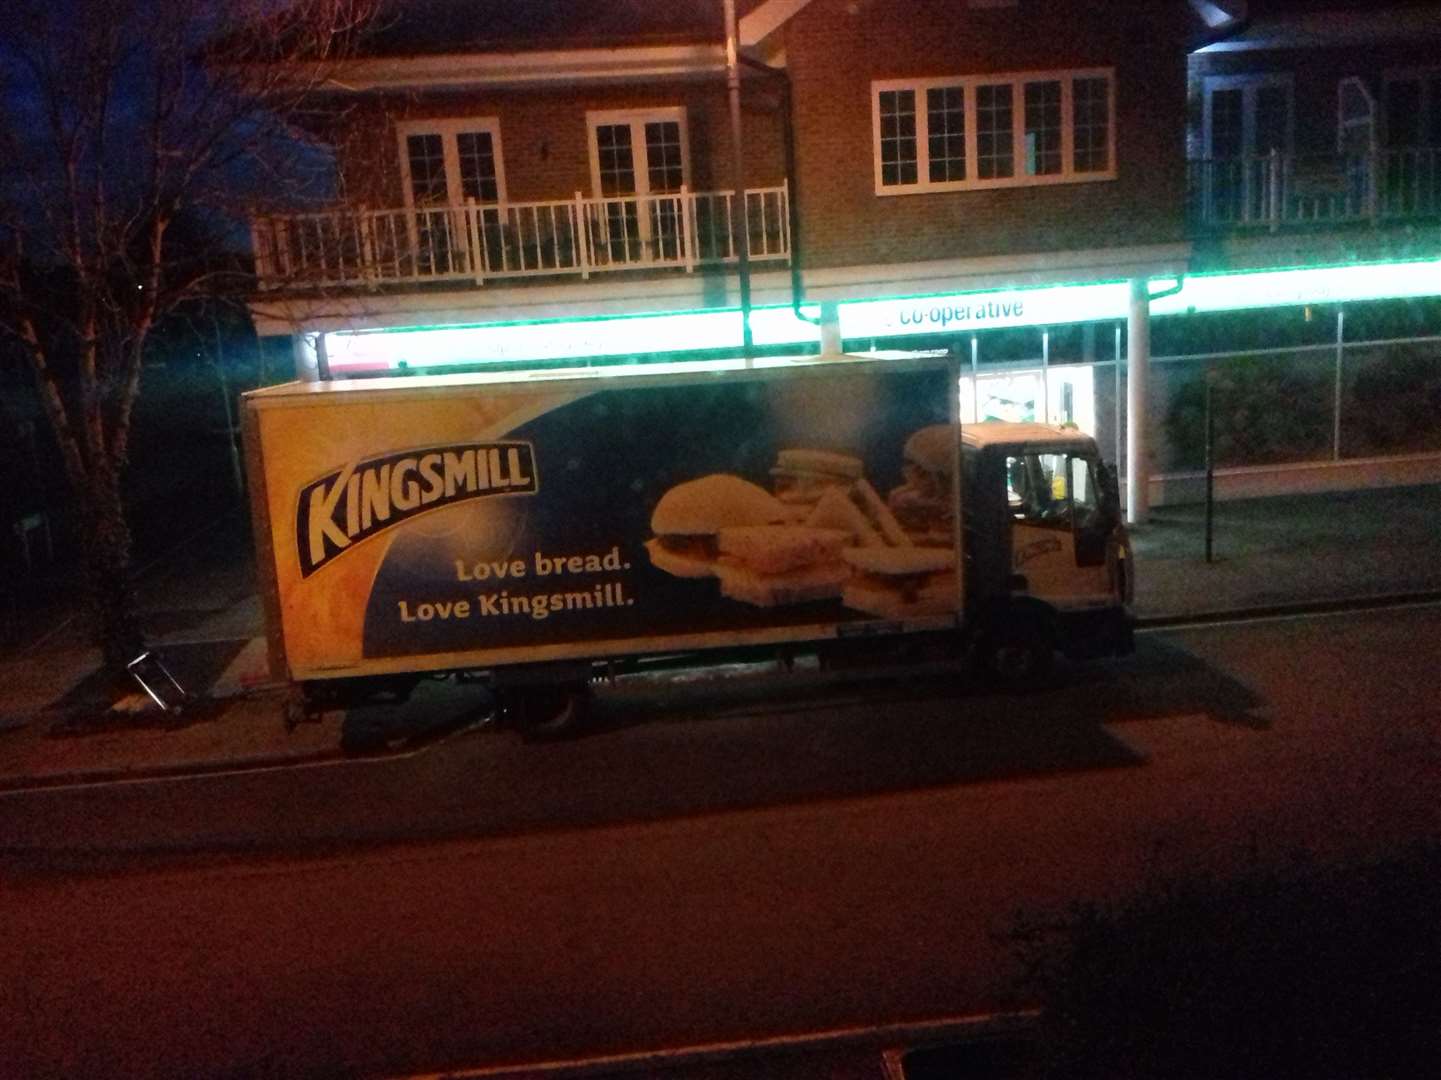 A delivery allegedly made at 6.35am. Pic: Paul Elliott